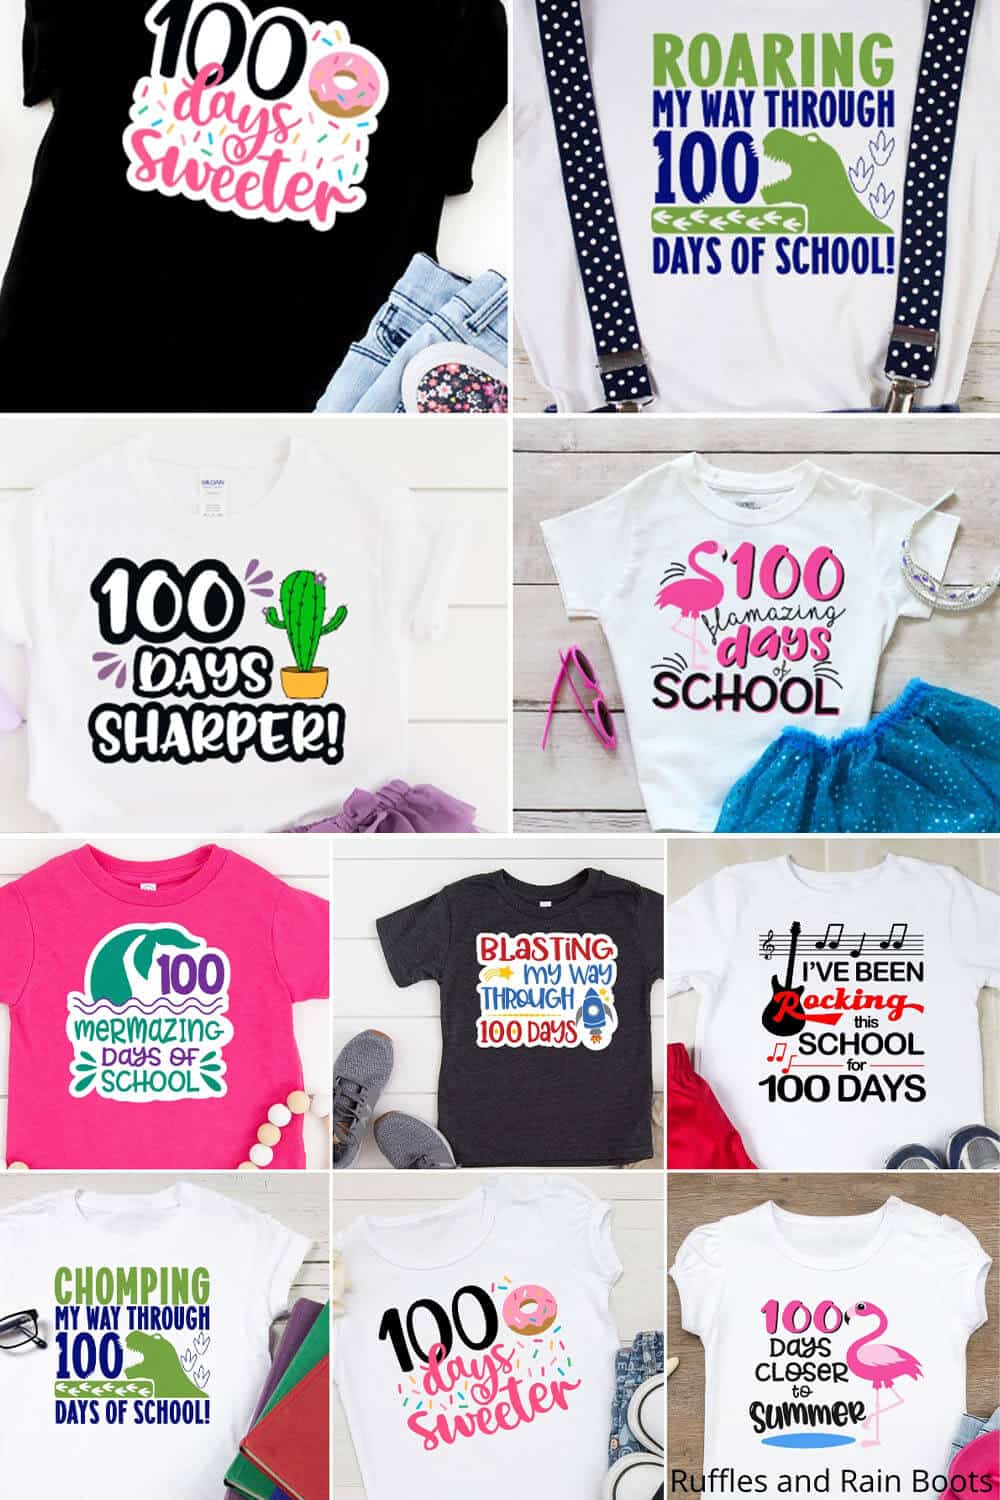 10 image collage of 100 days of school SVG bundle from Ruffles and Rain Boots.